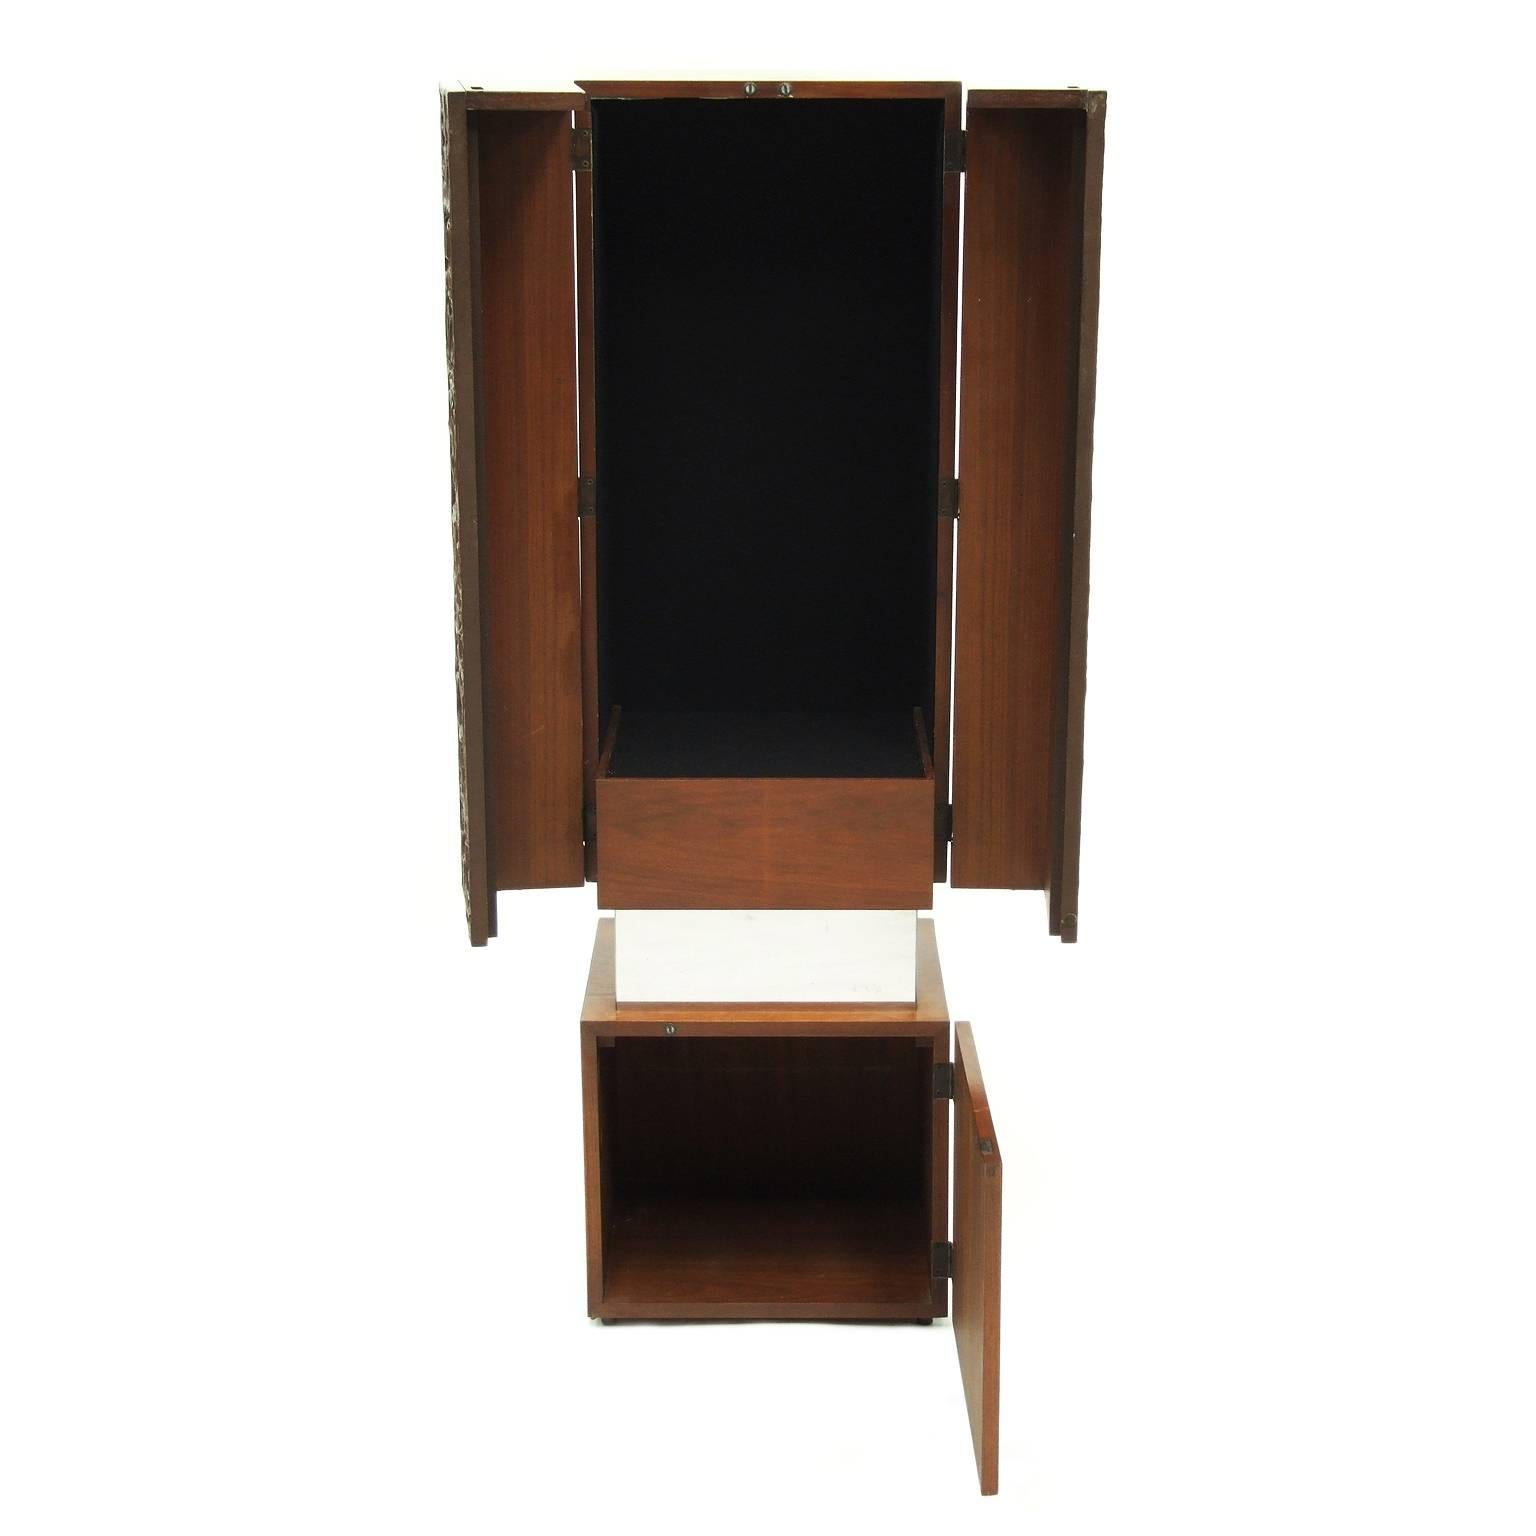 1970s decorative cabinet designed and manufactured in the USA.

Totem design construction with two teak cabinets divided by a polished aluminium plinth.

Black felt interior to top cabinet.

Measures: H 142cm x W 42cm x D 40cm.